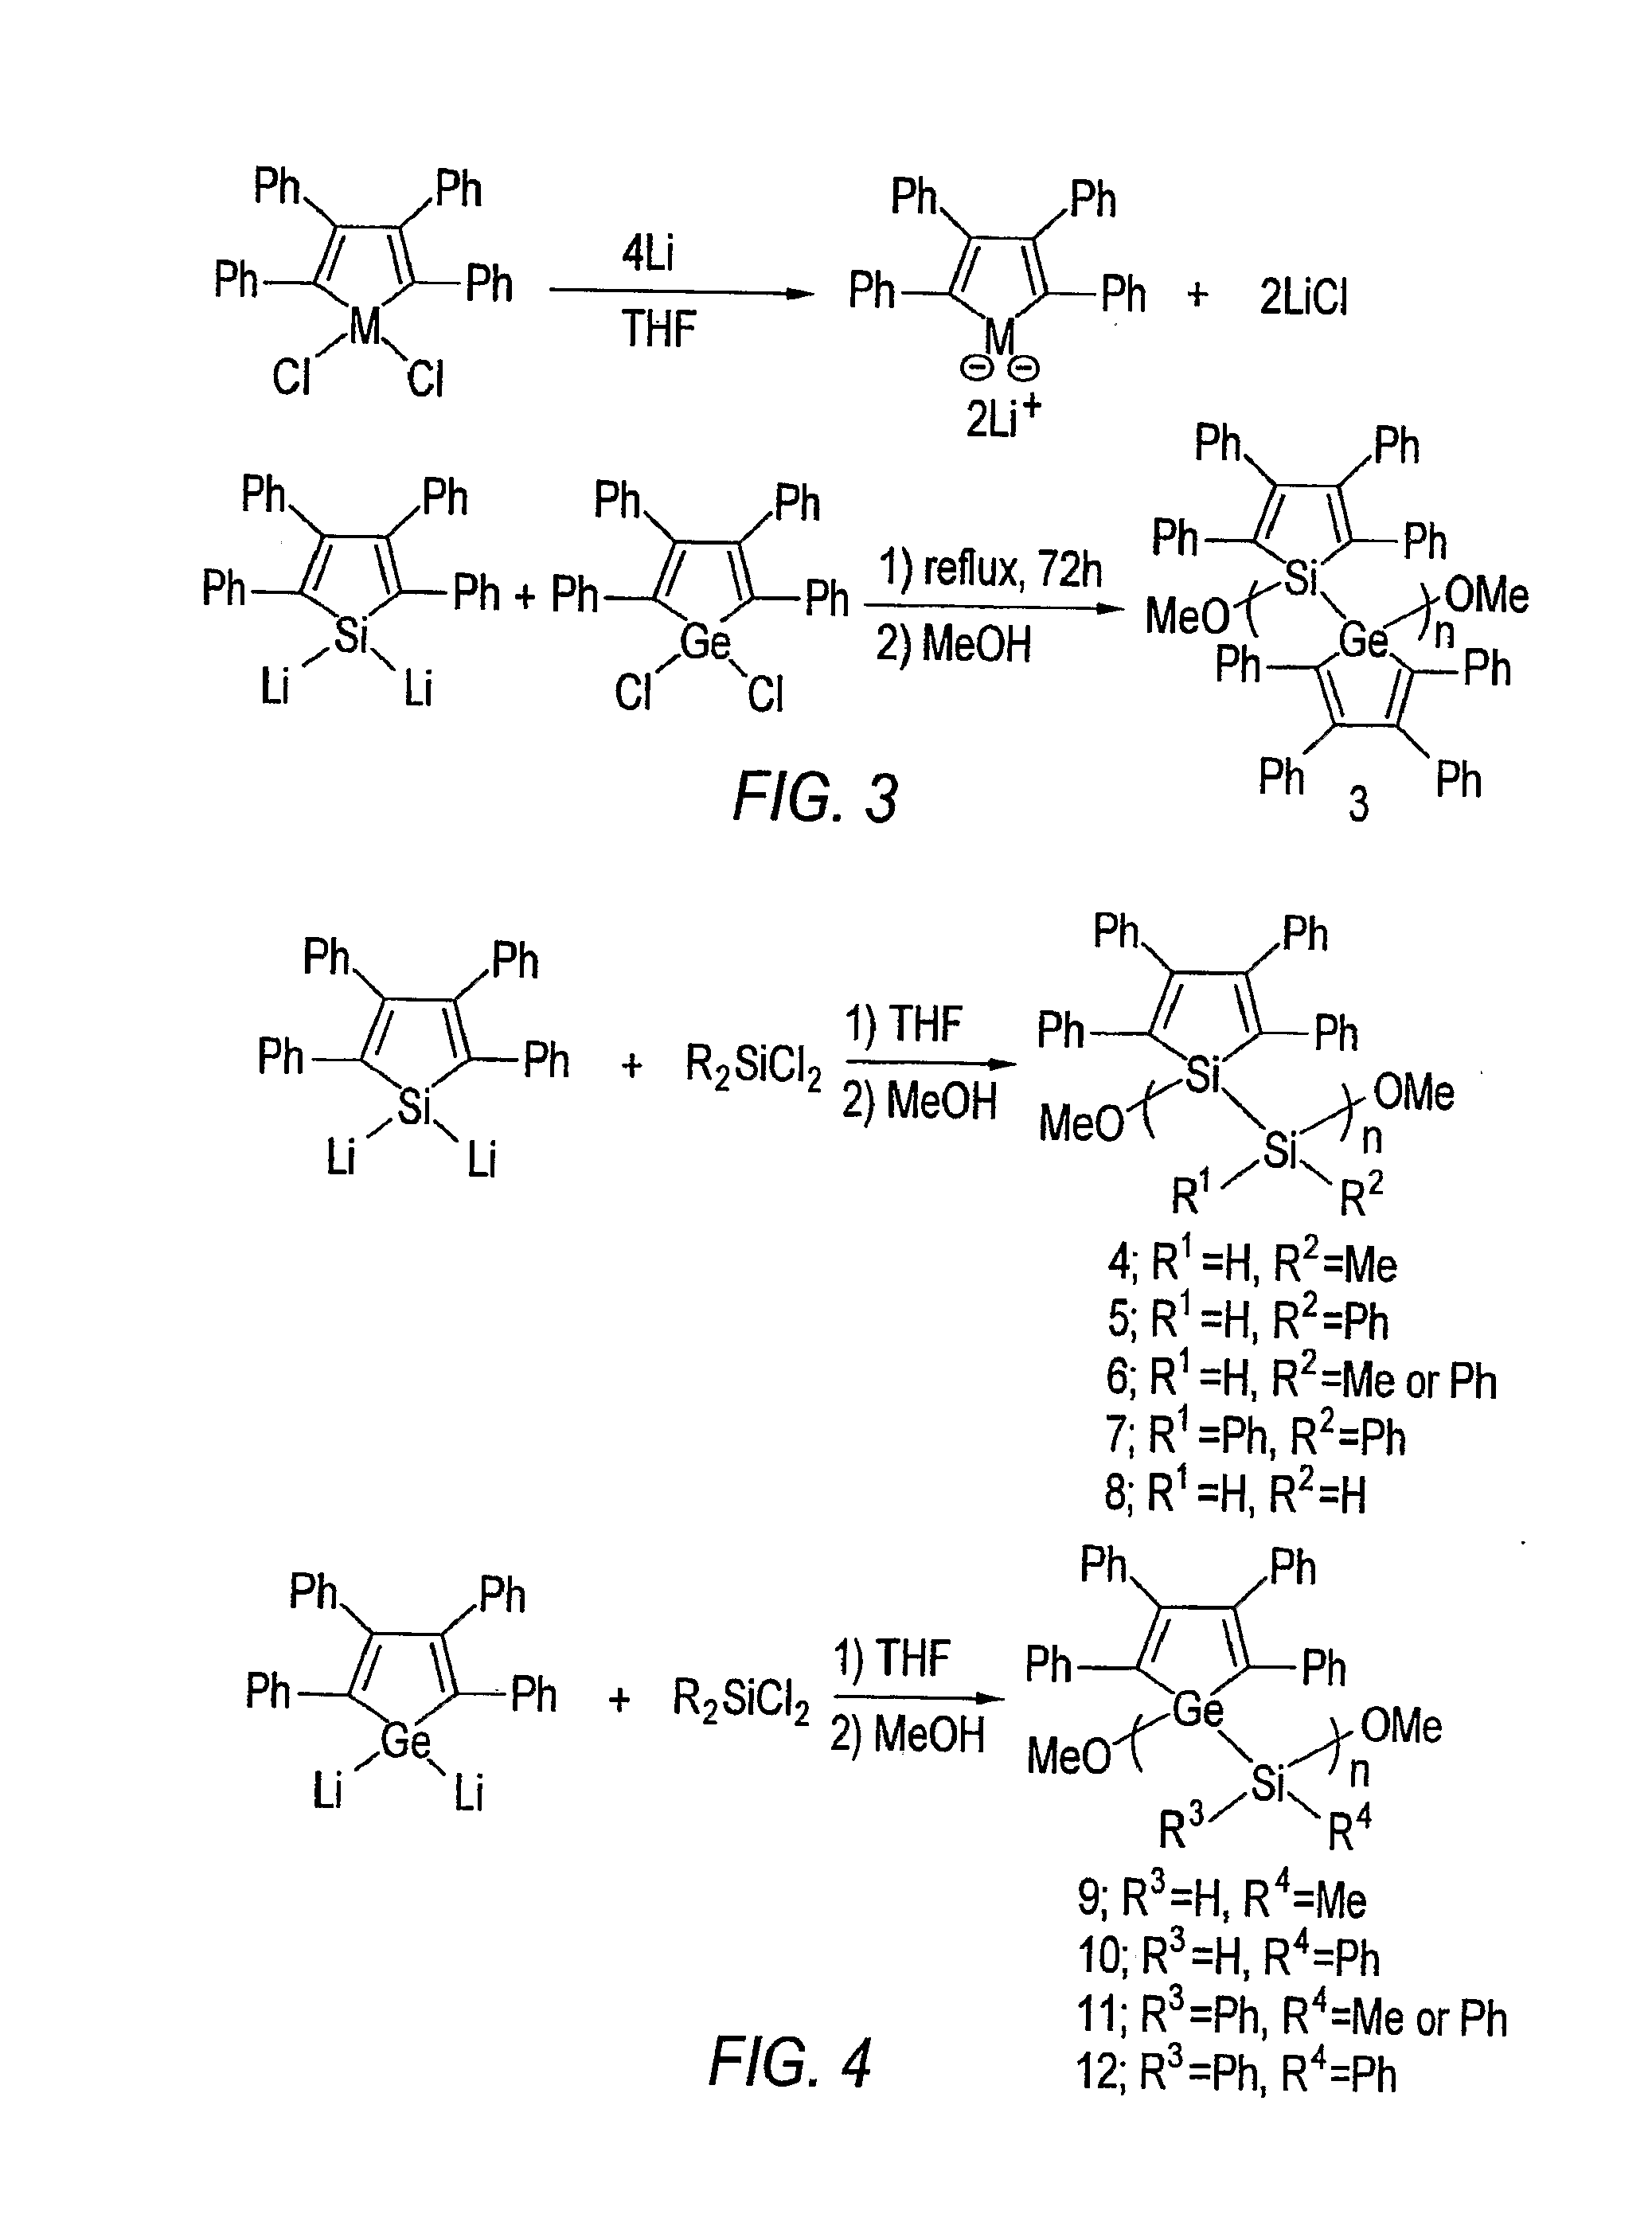 Detection of nitro- and nitrate-containing compounds